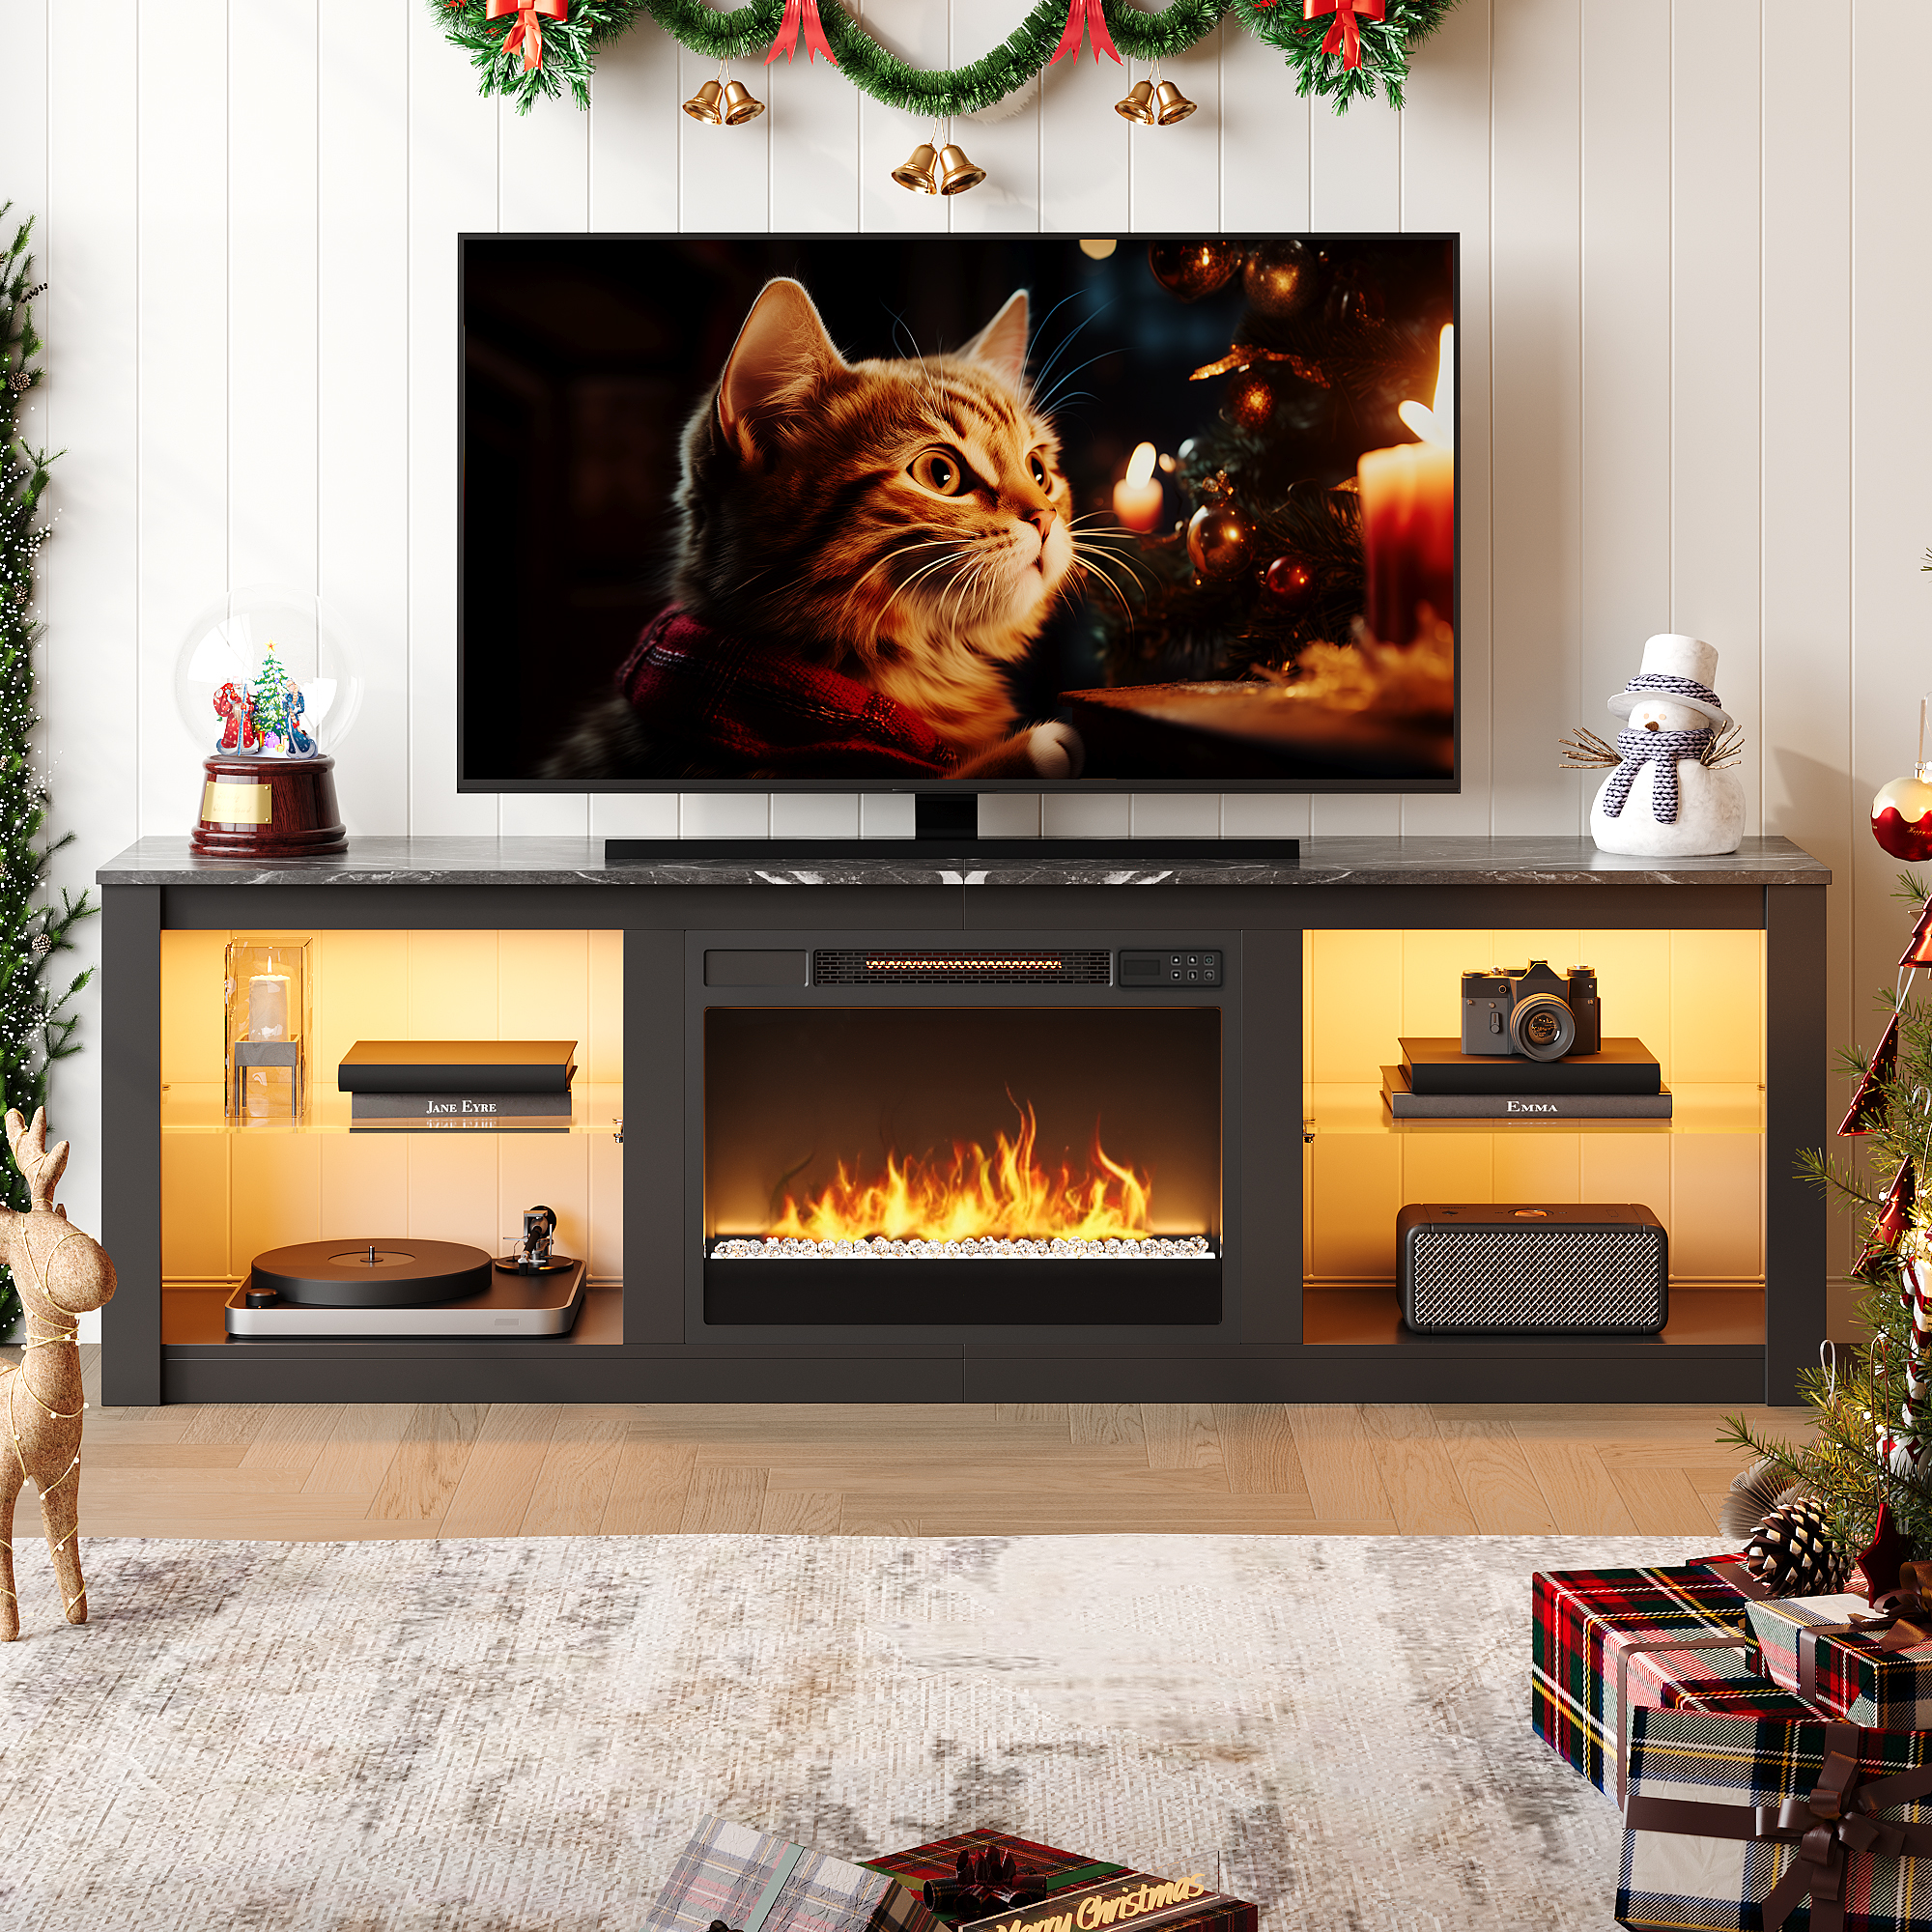 Bestier Electric Fireplace TV Stand for 75inch TV, Farmhouse Entertainment Center with LED Light for Living Room in Black - image 1 of 10